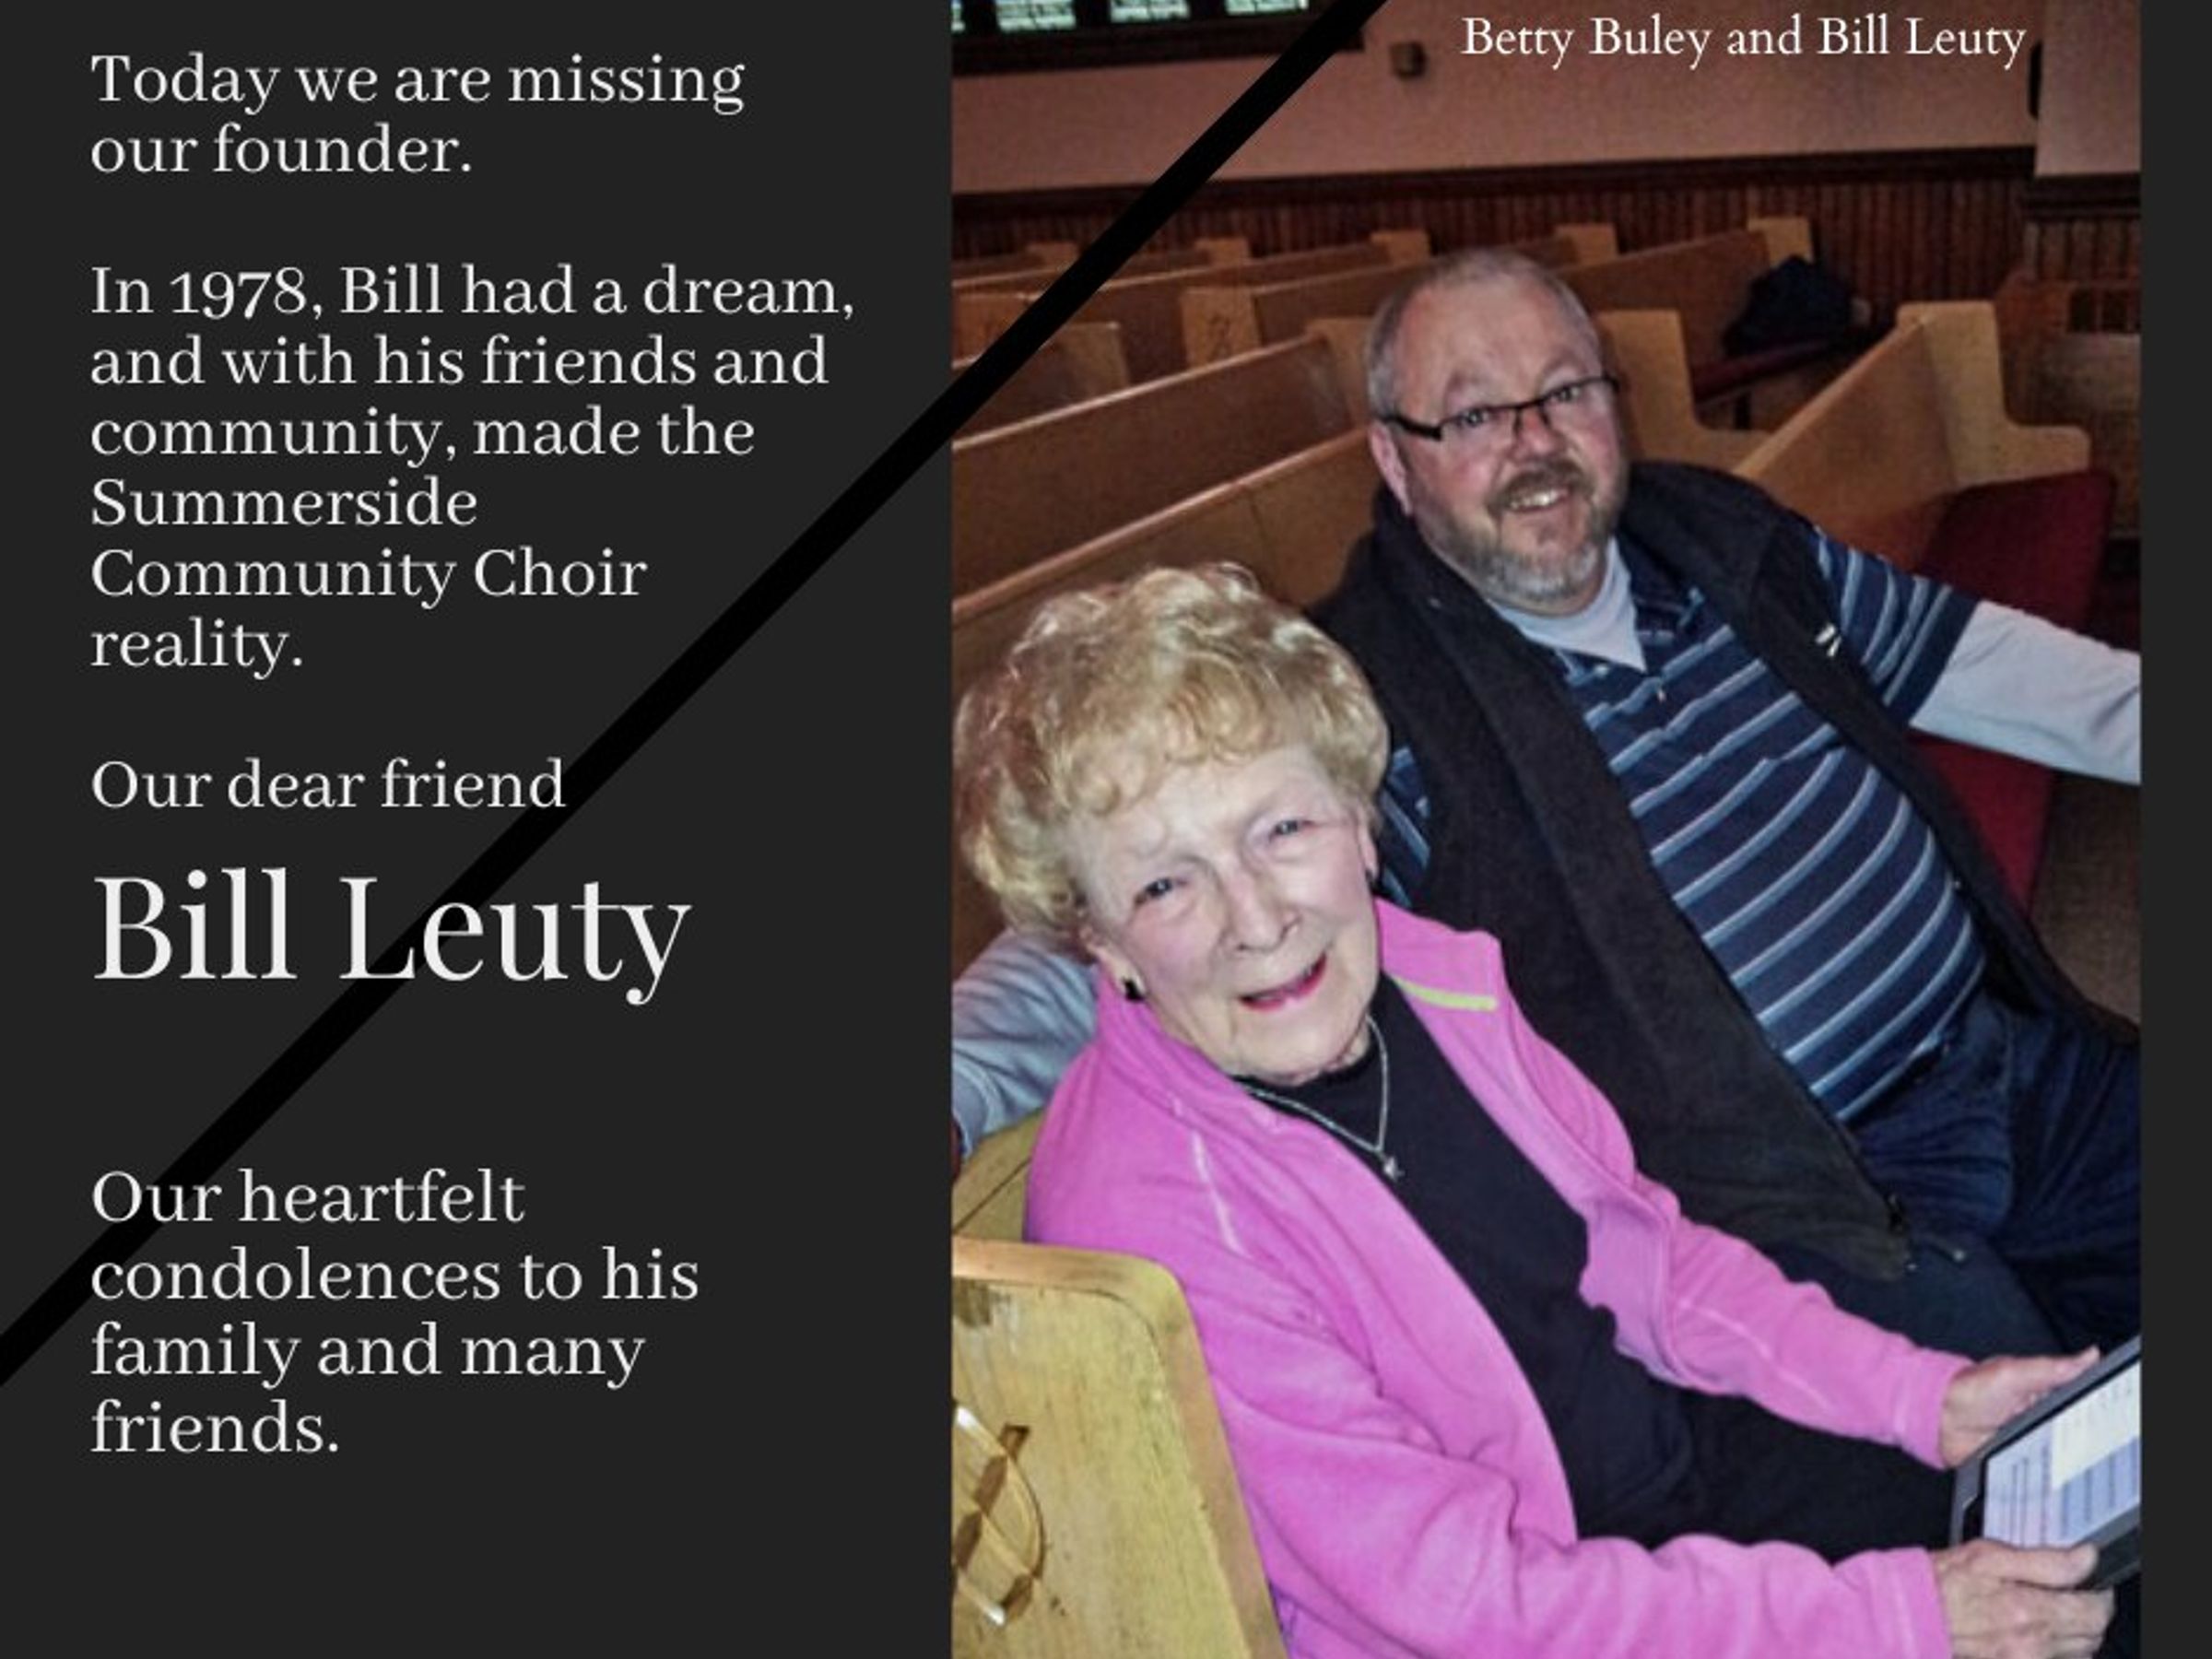 Bill Leuty, the choir's founder, sitting in a church pew with Betty Buley. Today we are missing our founder.